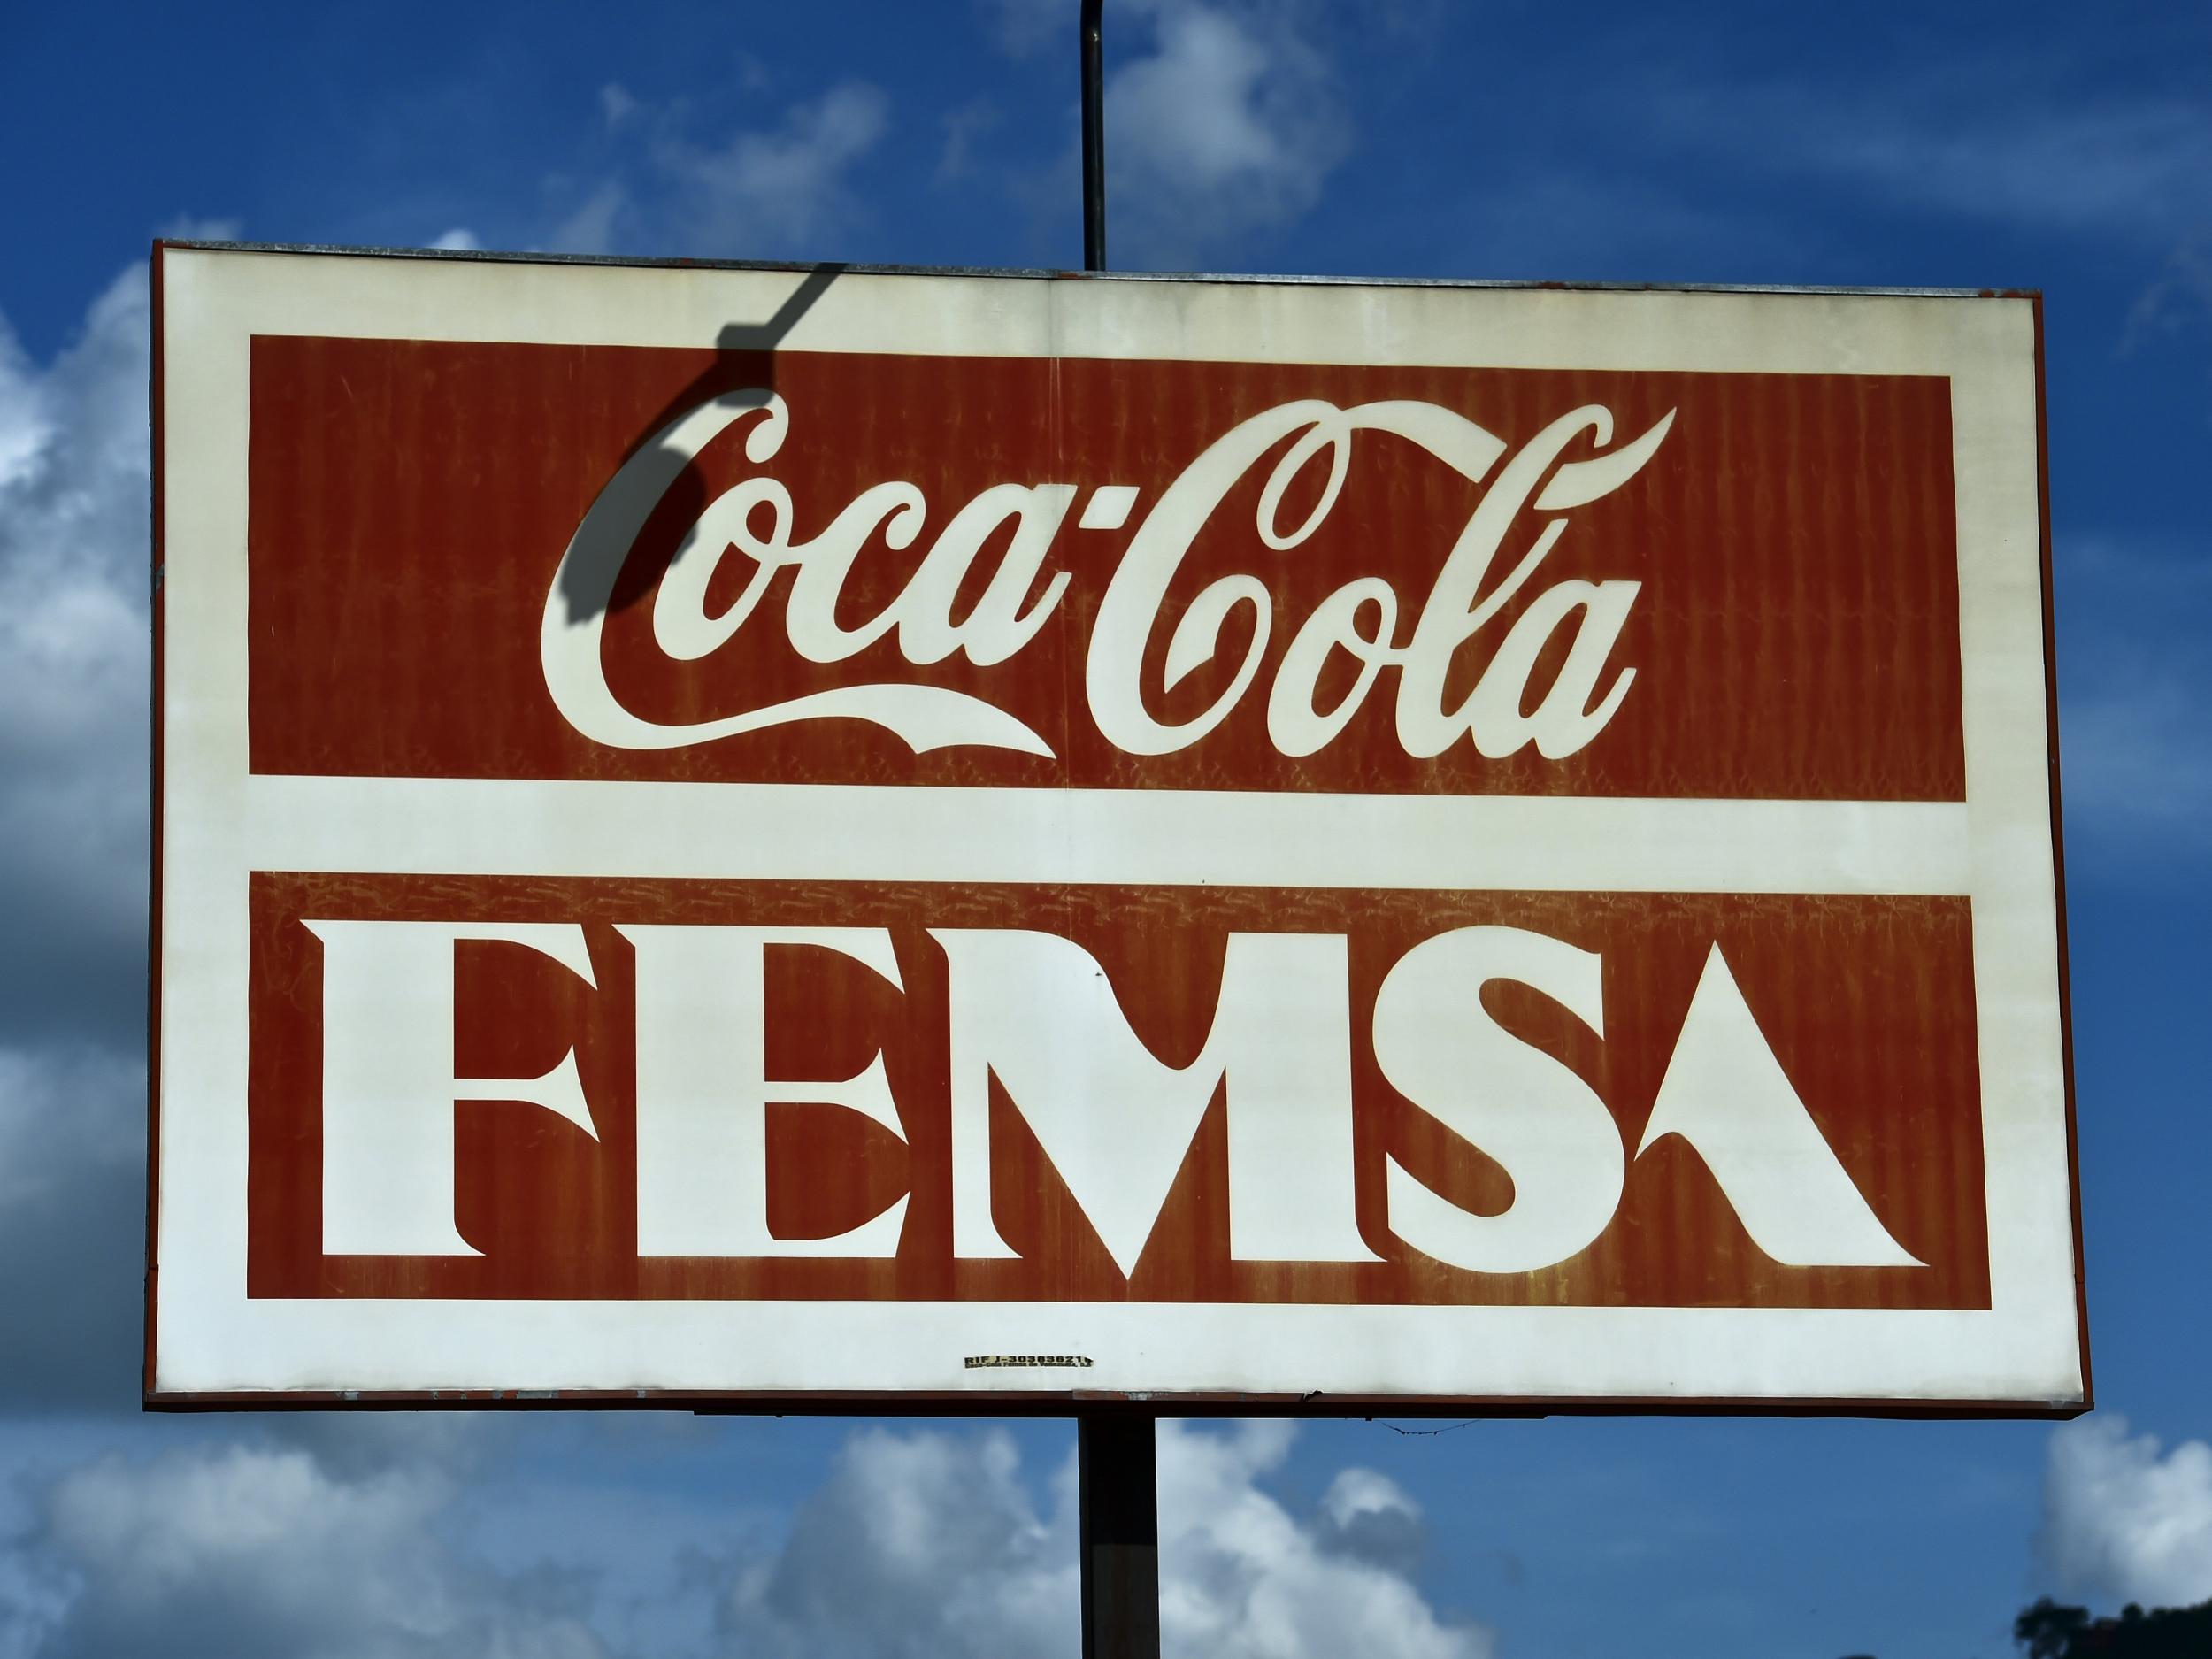 FEMSA bottles Coca-Cola in Mexico and extracts more than 300,000 gallons of water a day via its plant in the town